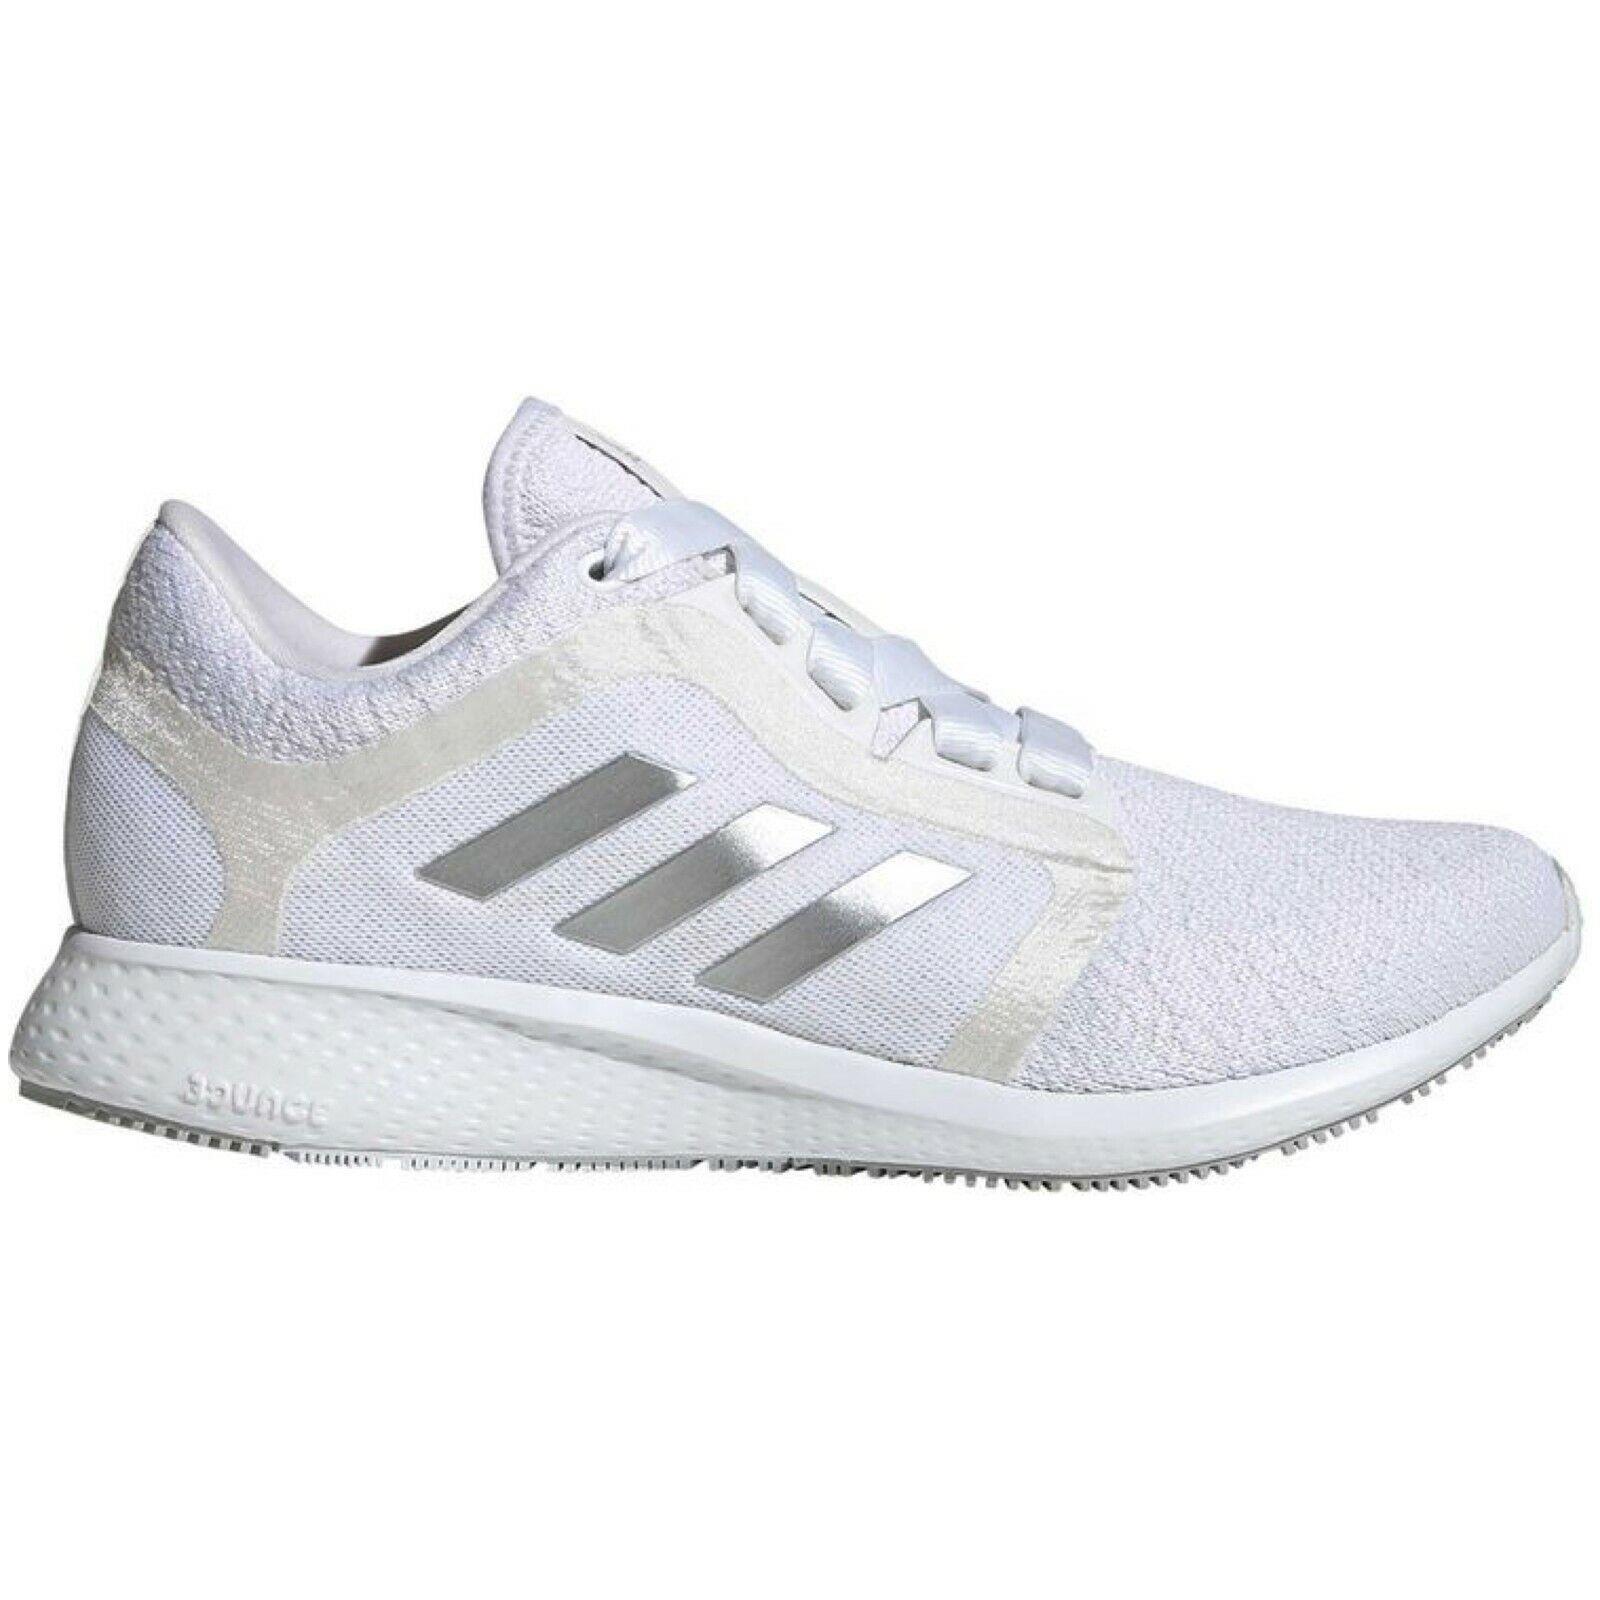 Adidas shoes Edge Lux - White , WHITE/SILVER Manufacturer 4